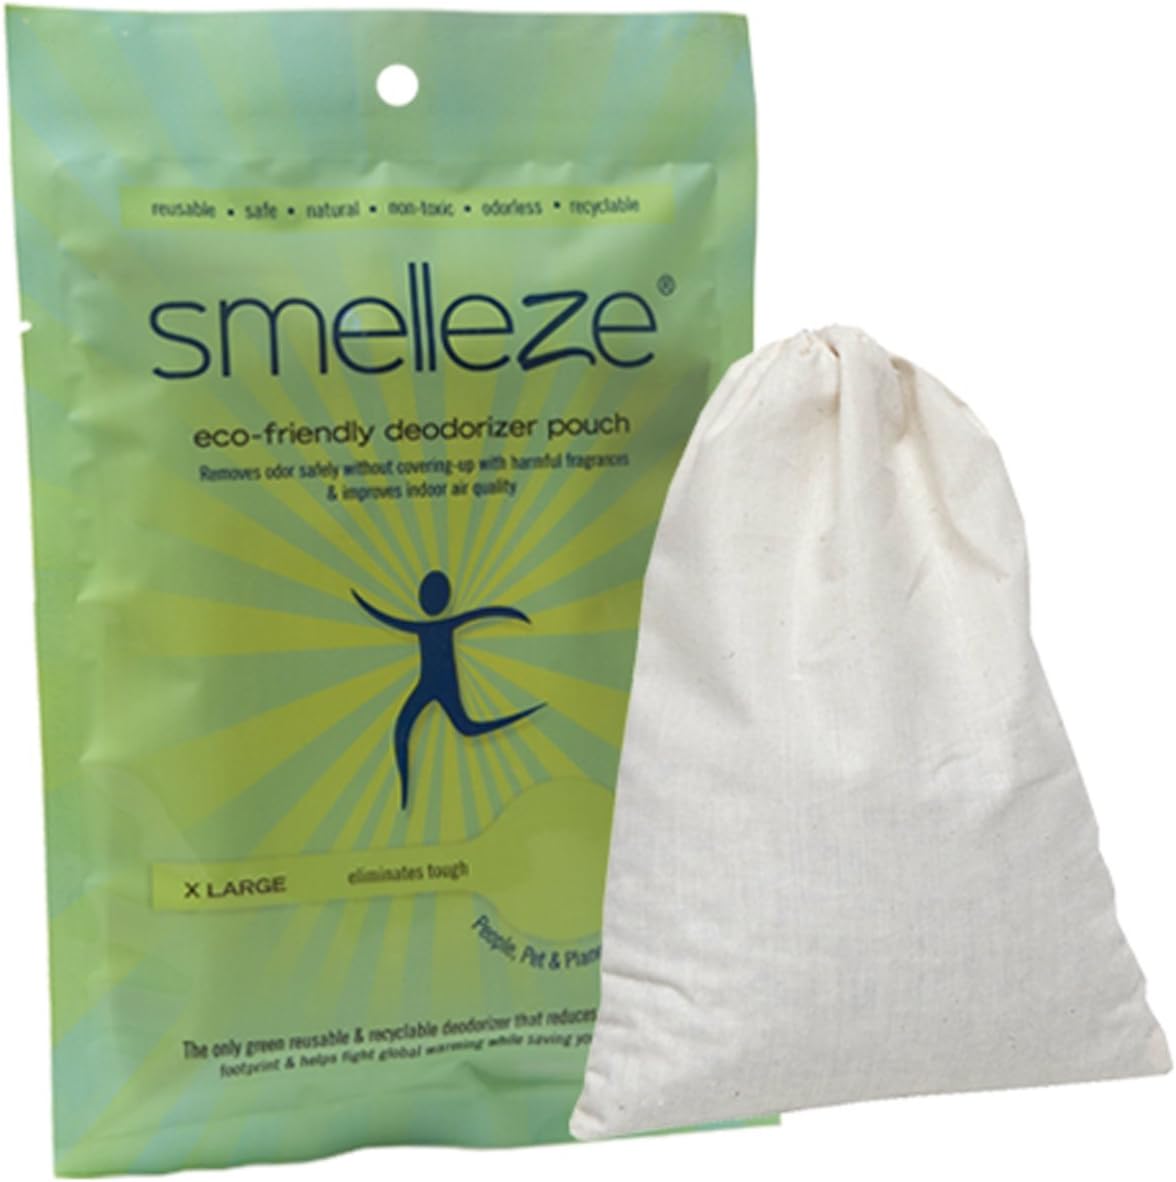 SMELLEZE Reusable Hospital Smell Removal Deodorizer Pouch: Stops Medical Odor Without Chemicals in 300 Sq. Ft